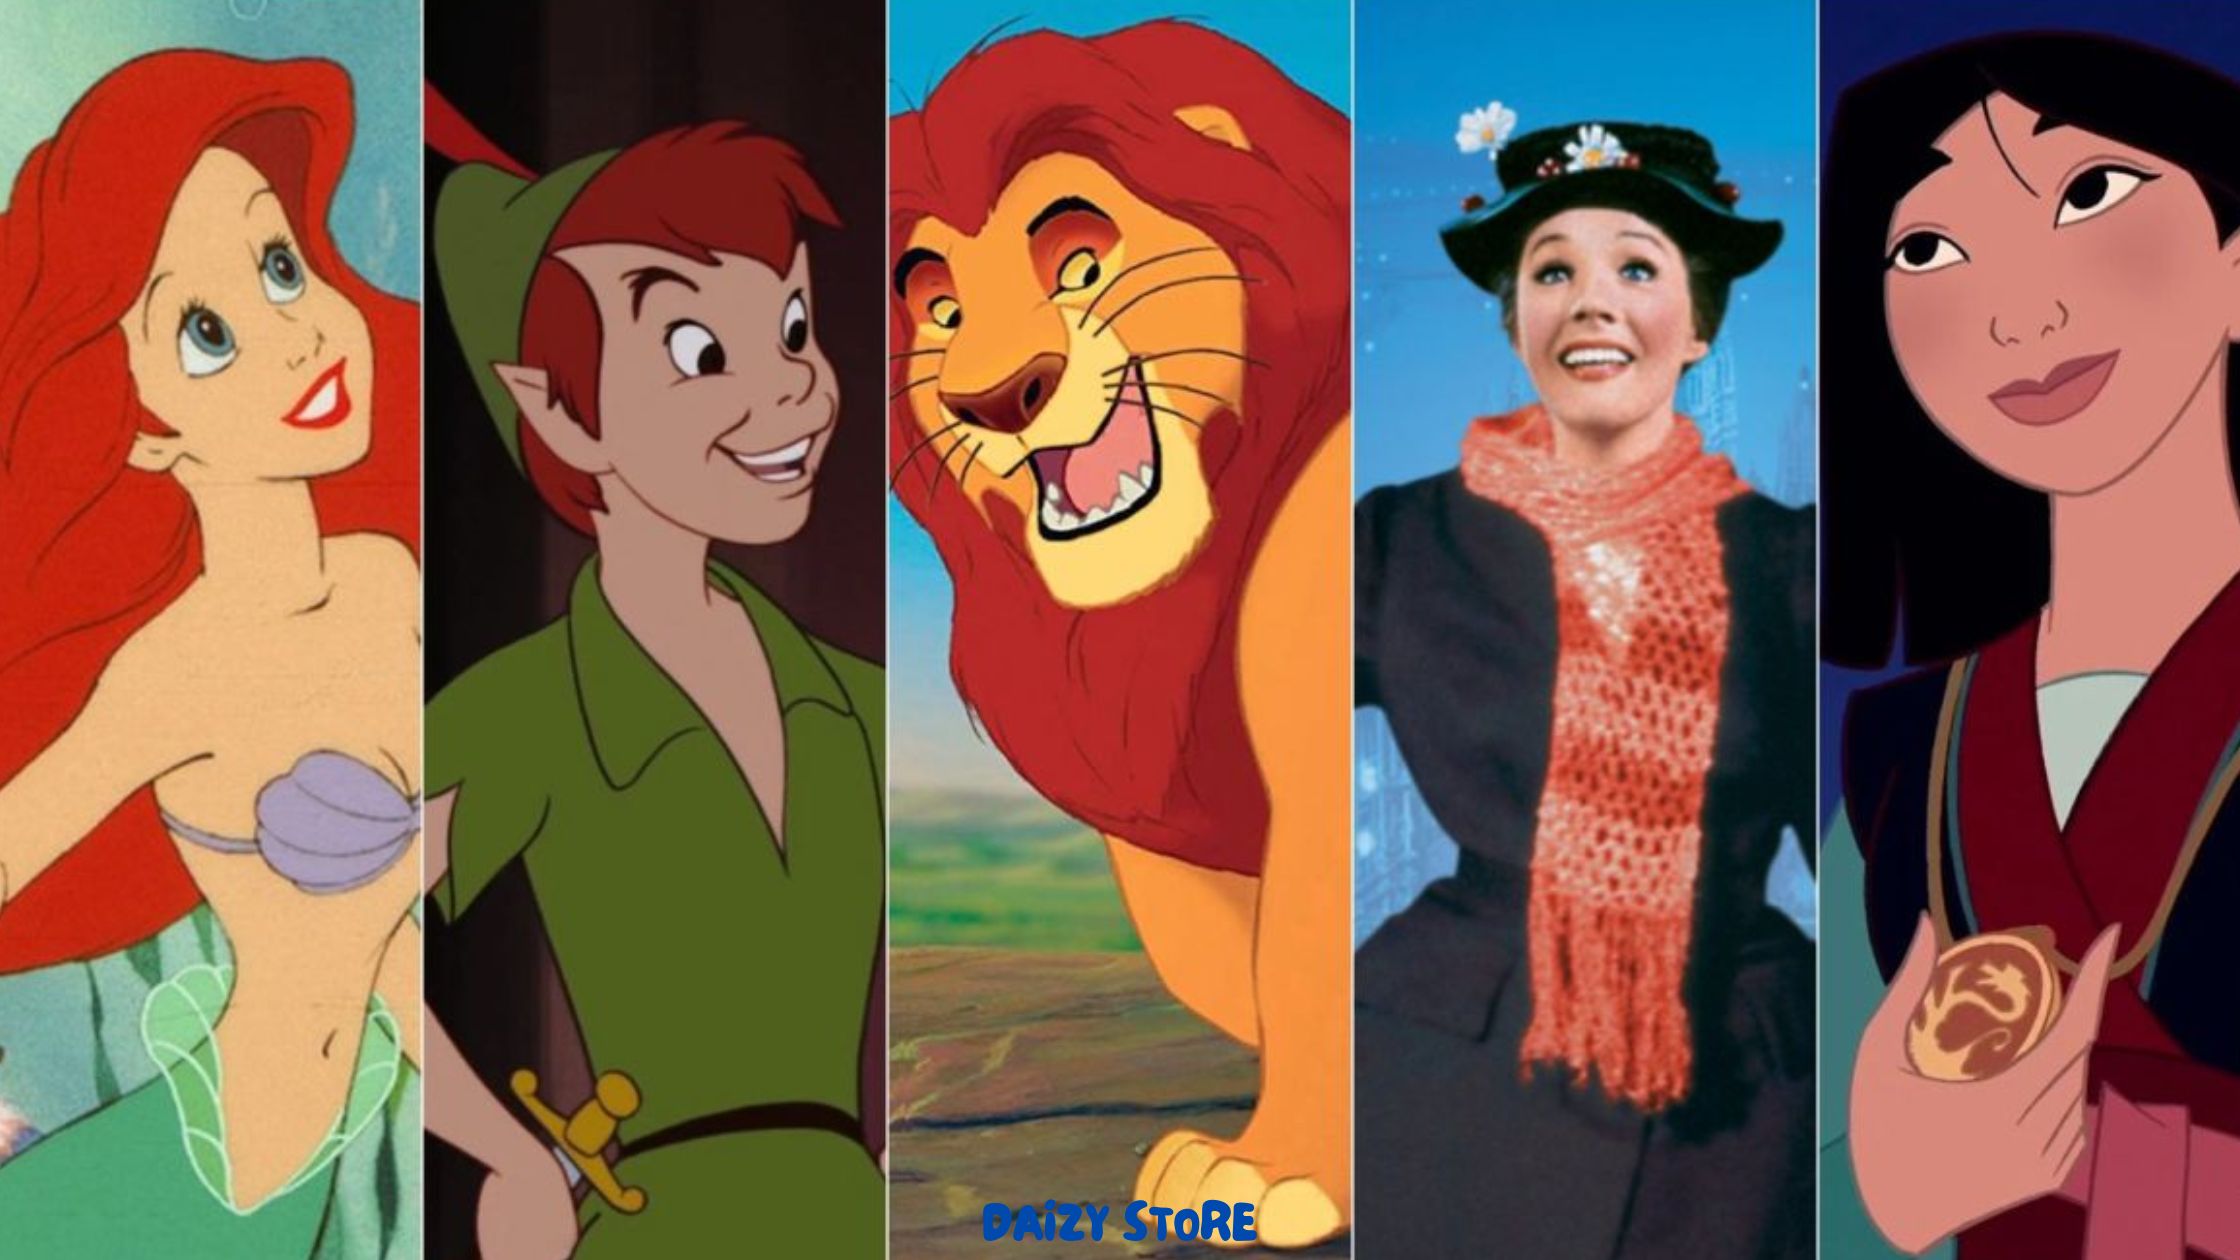 The revival of Disney animation in the 1980s and 1990s